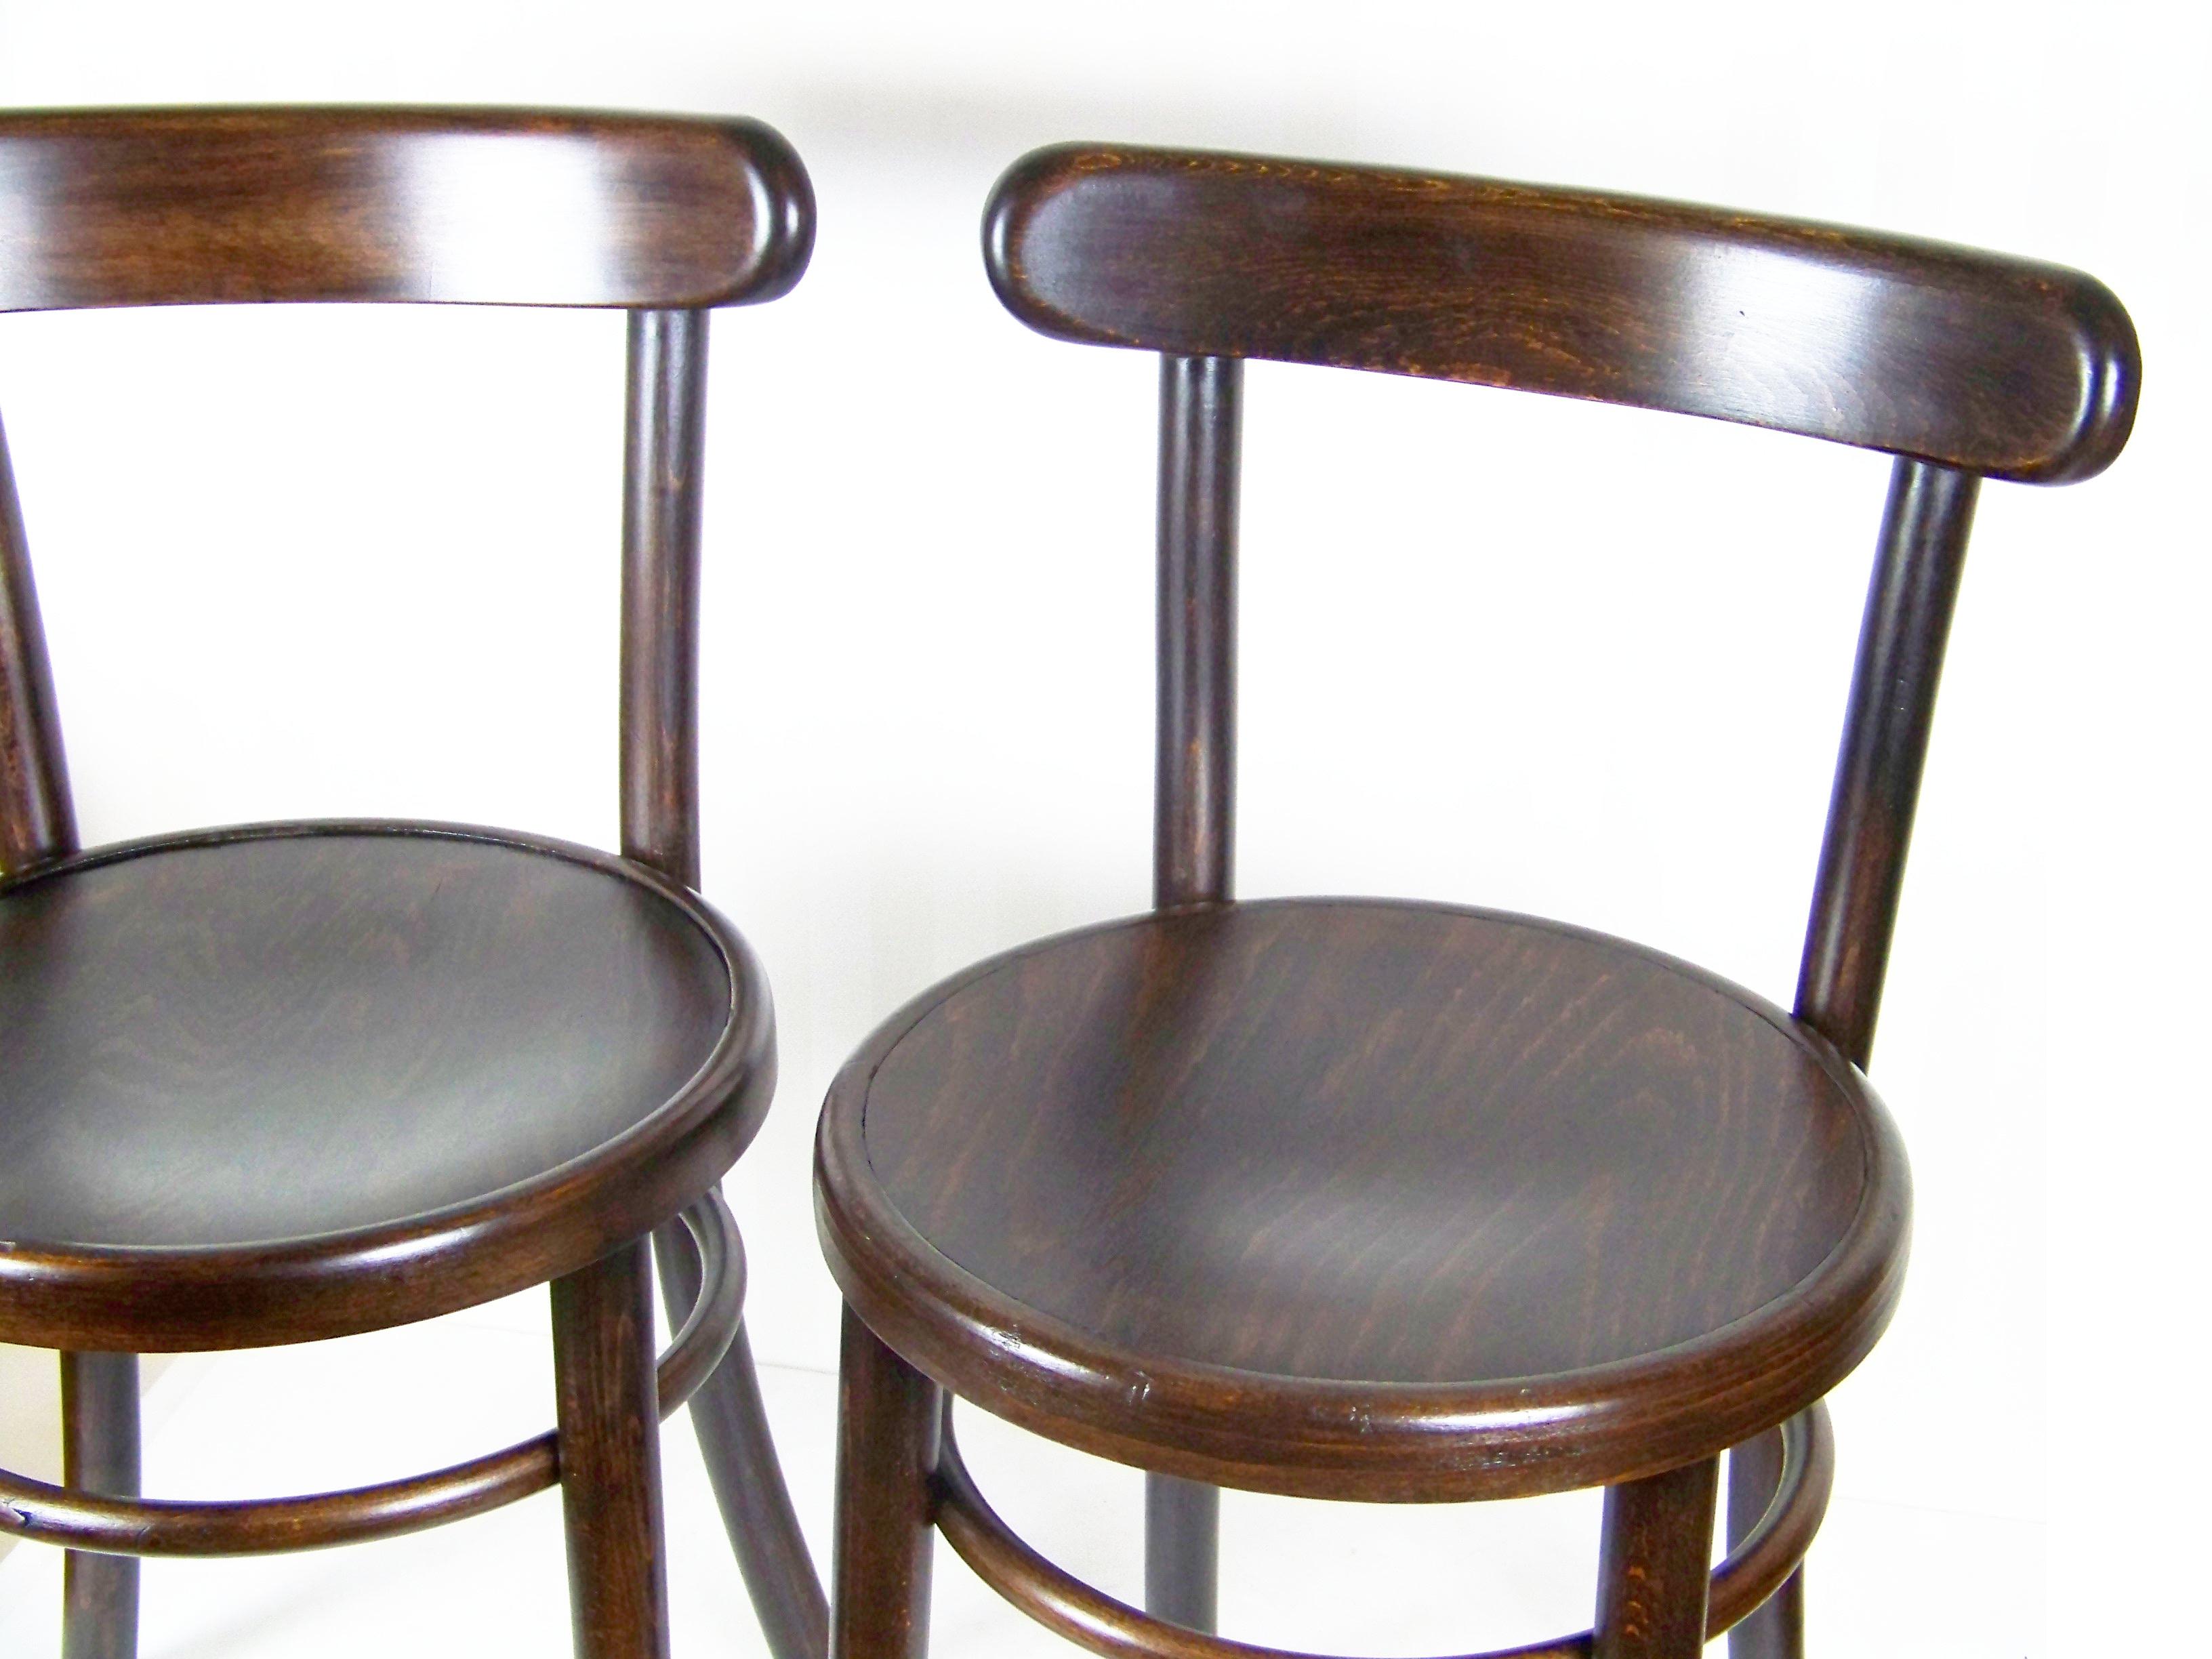 Bauhaus Two Chairs Thonet A730, since 1927